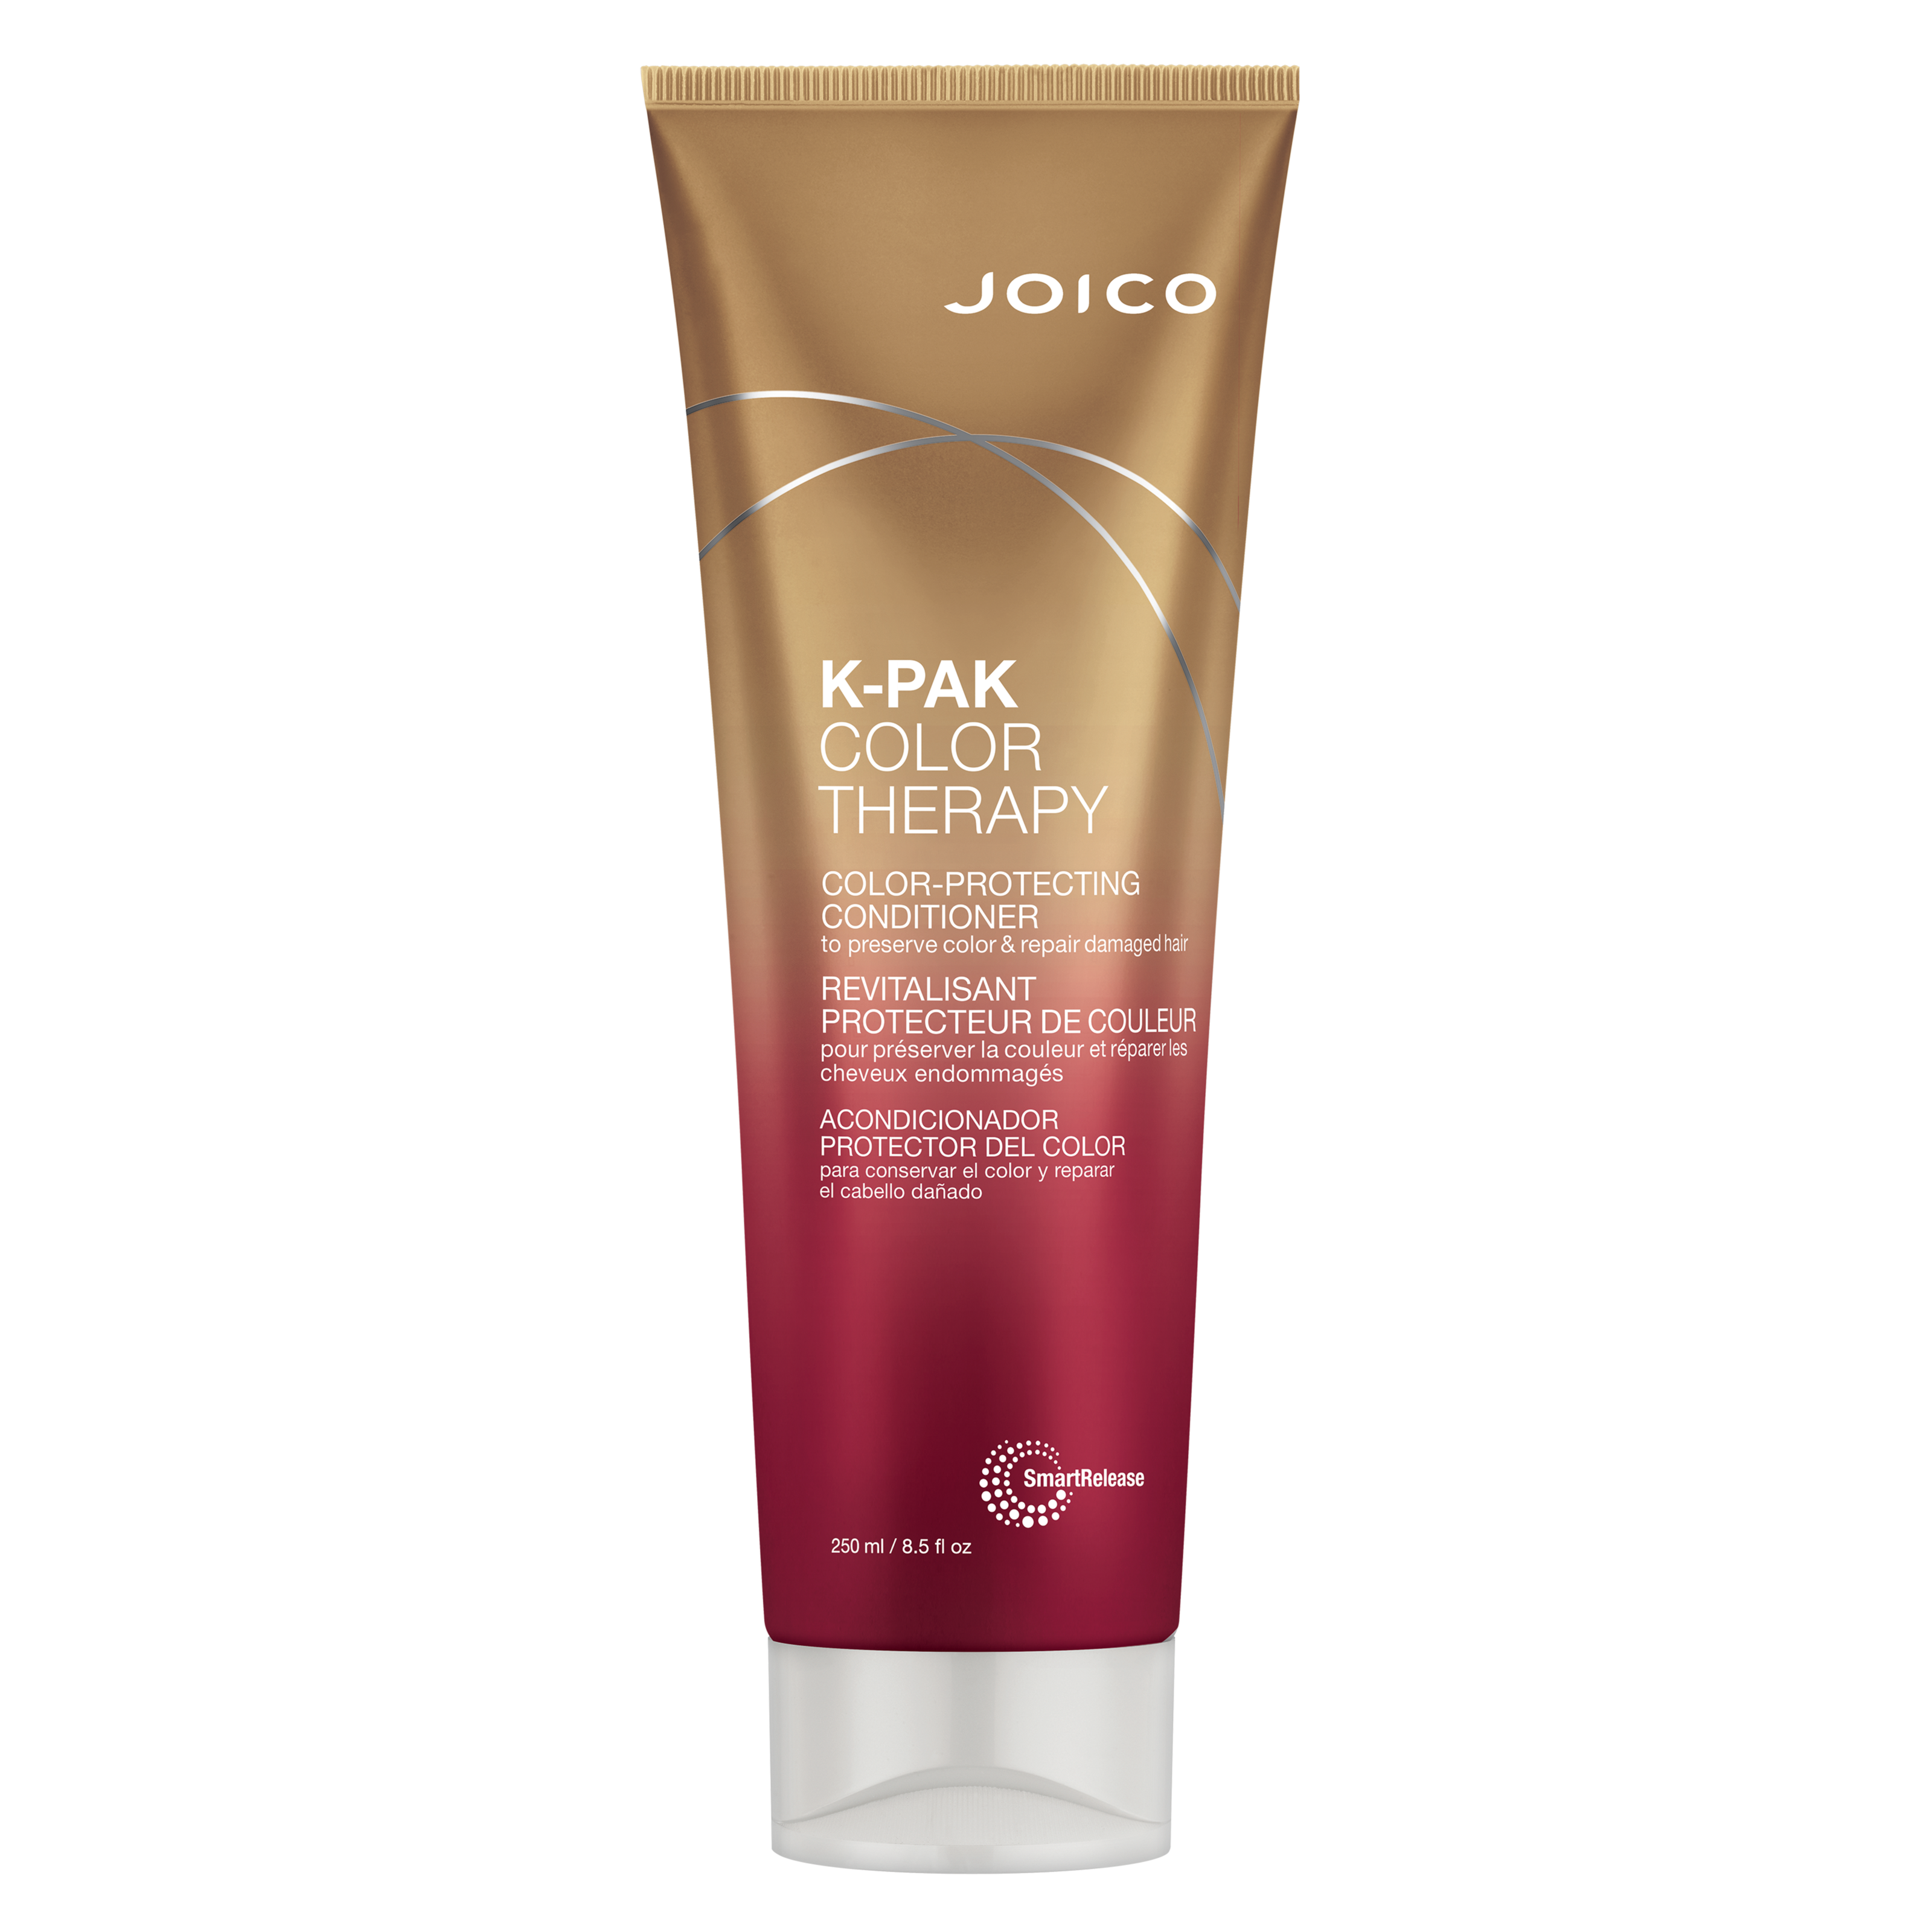 Läs mer om Joico K-pak Color Therapy Color-Protecting Conditioner 250 ml